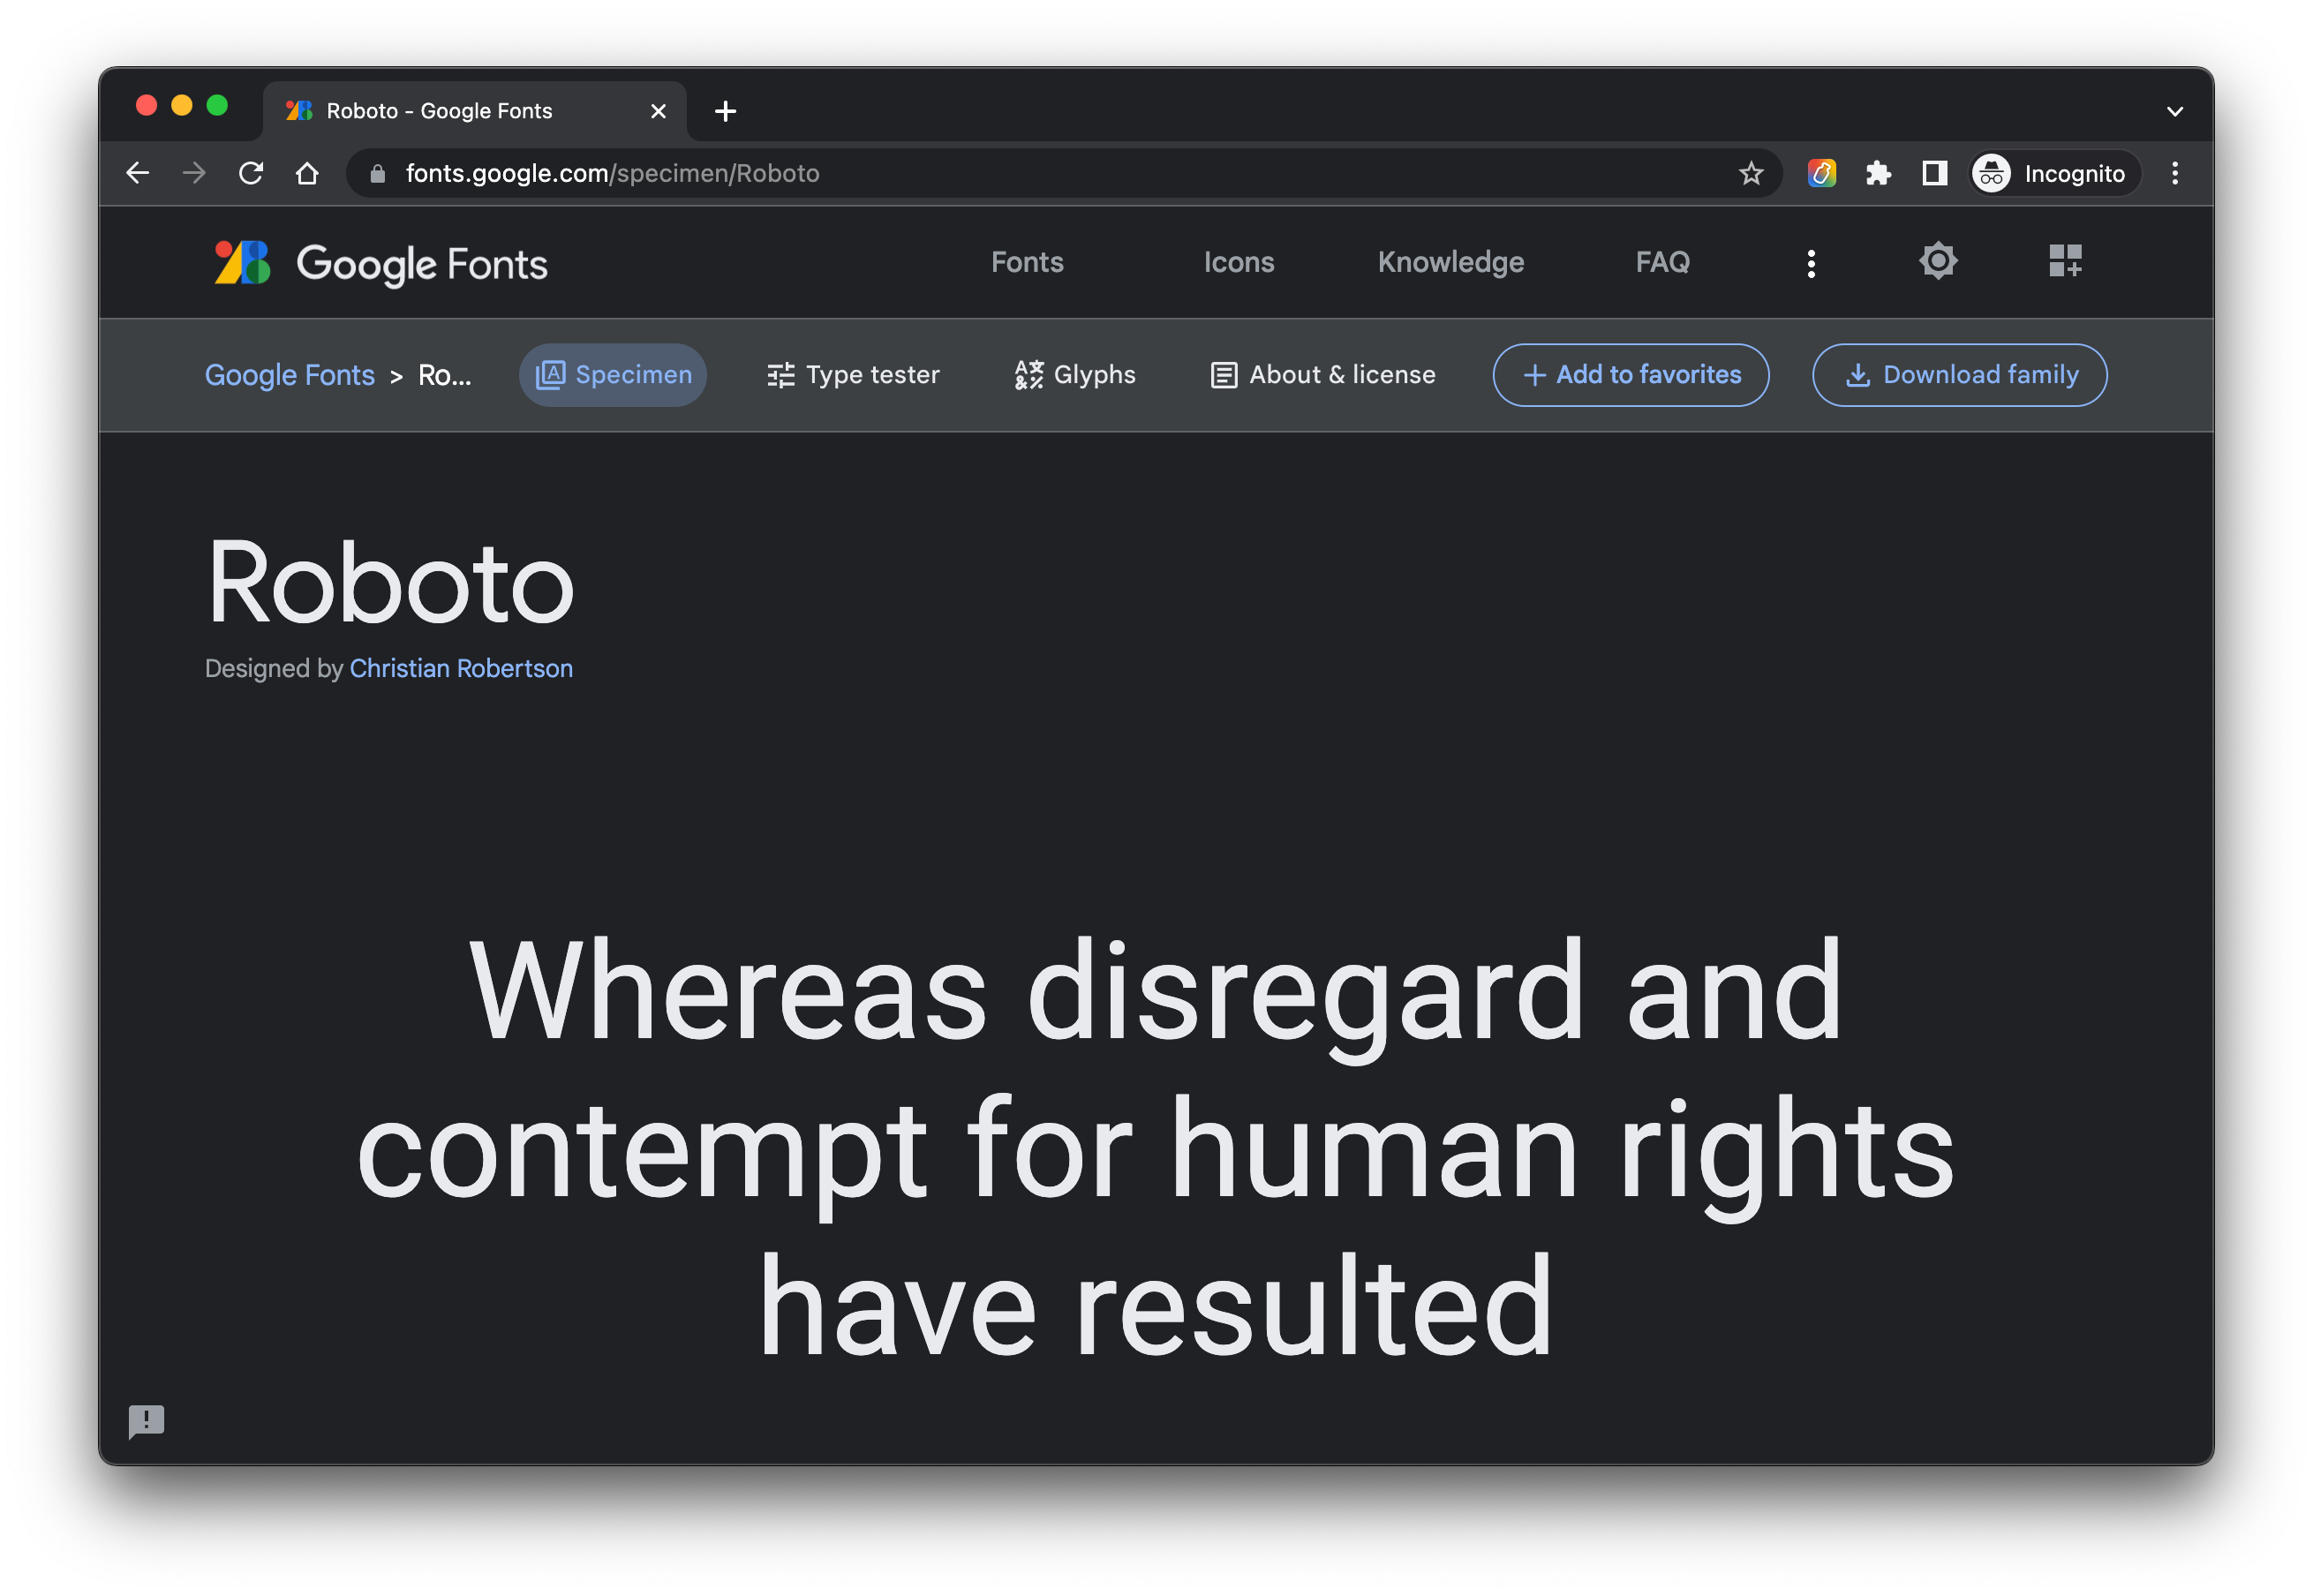 The Roboto page on Google Fonts